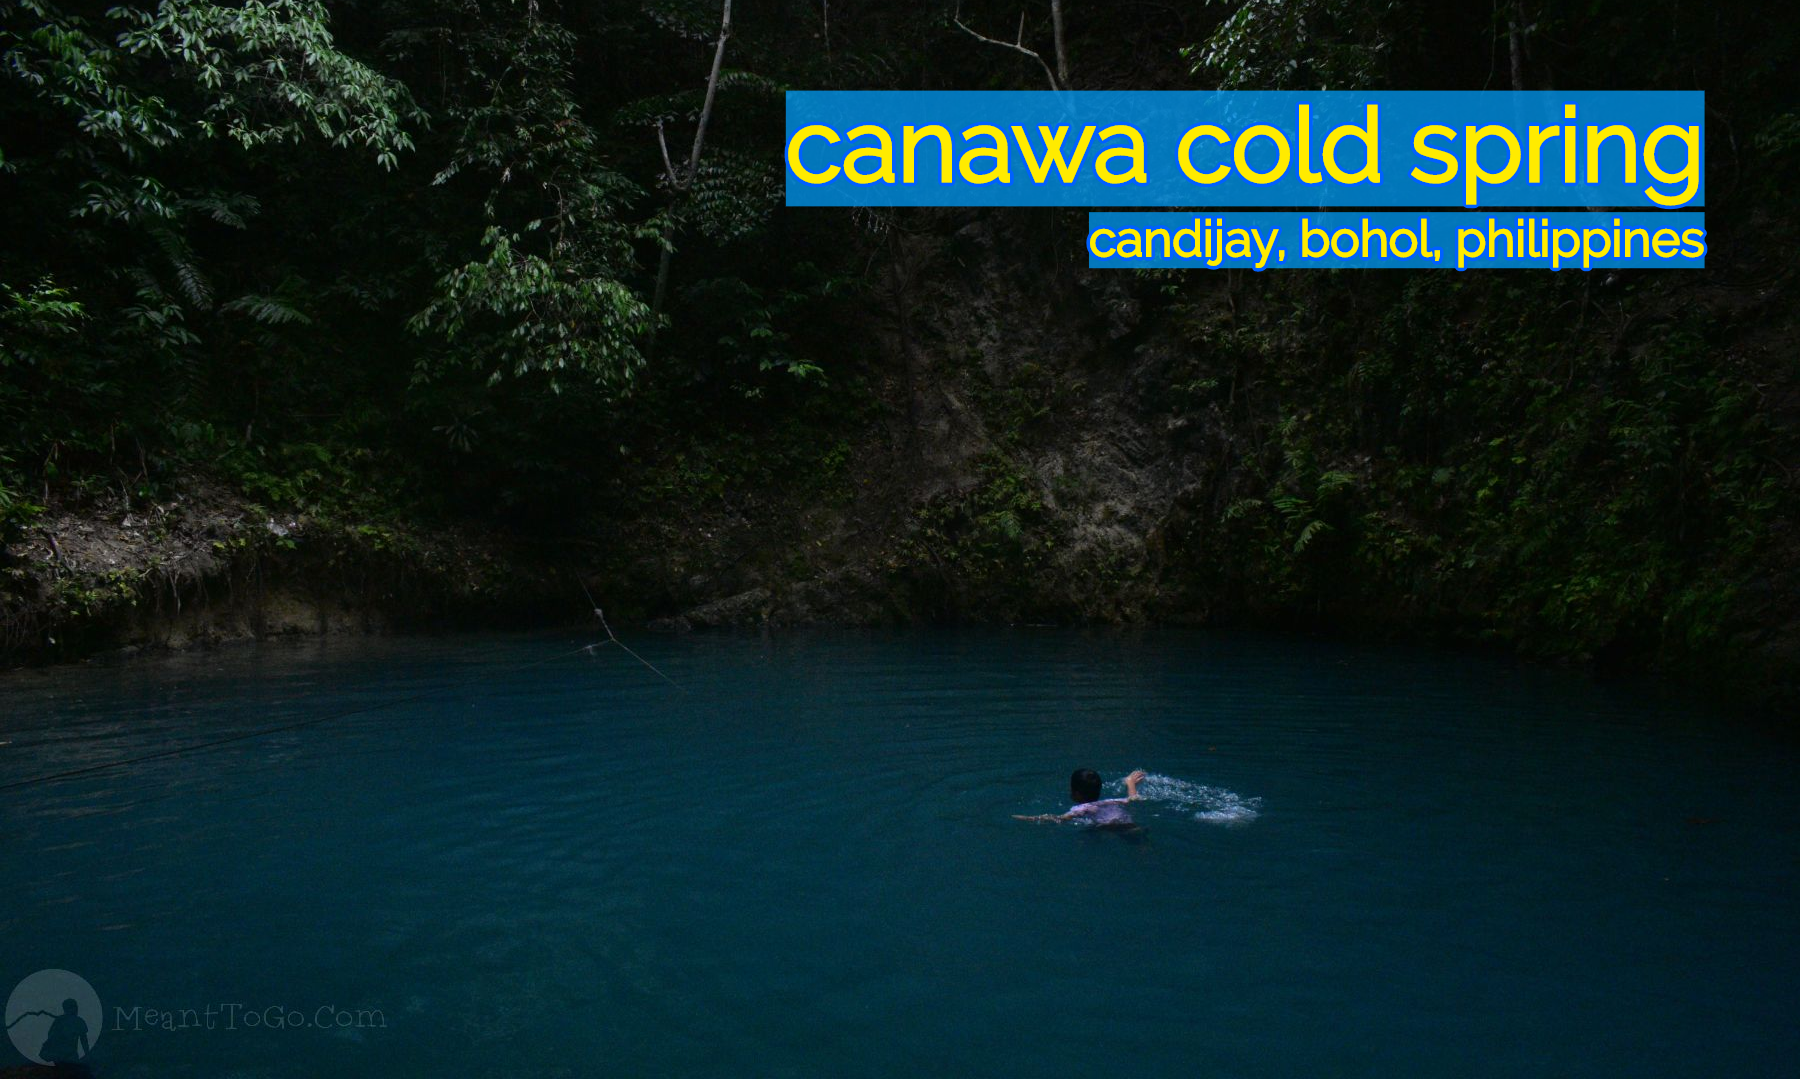 Canawa Cold Spring